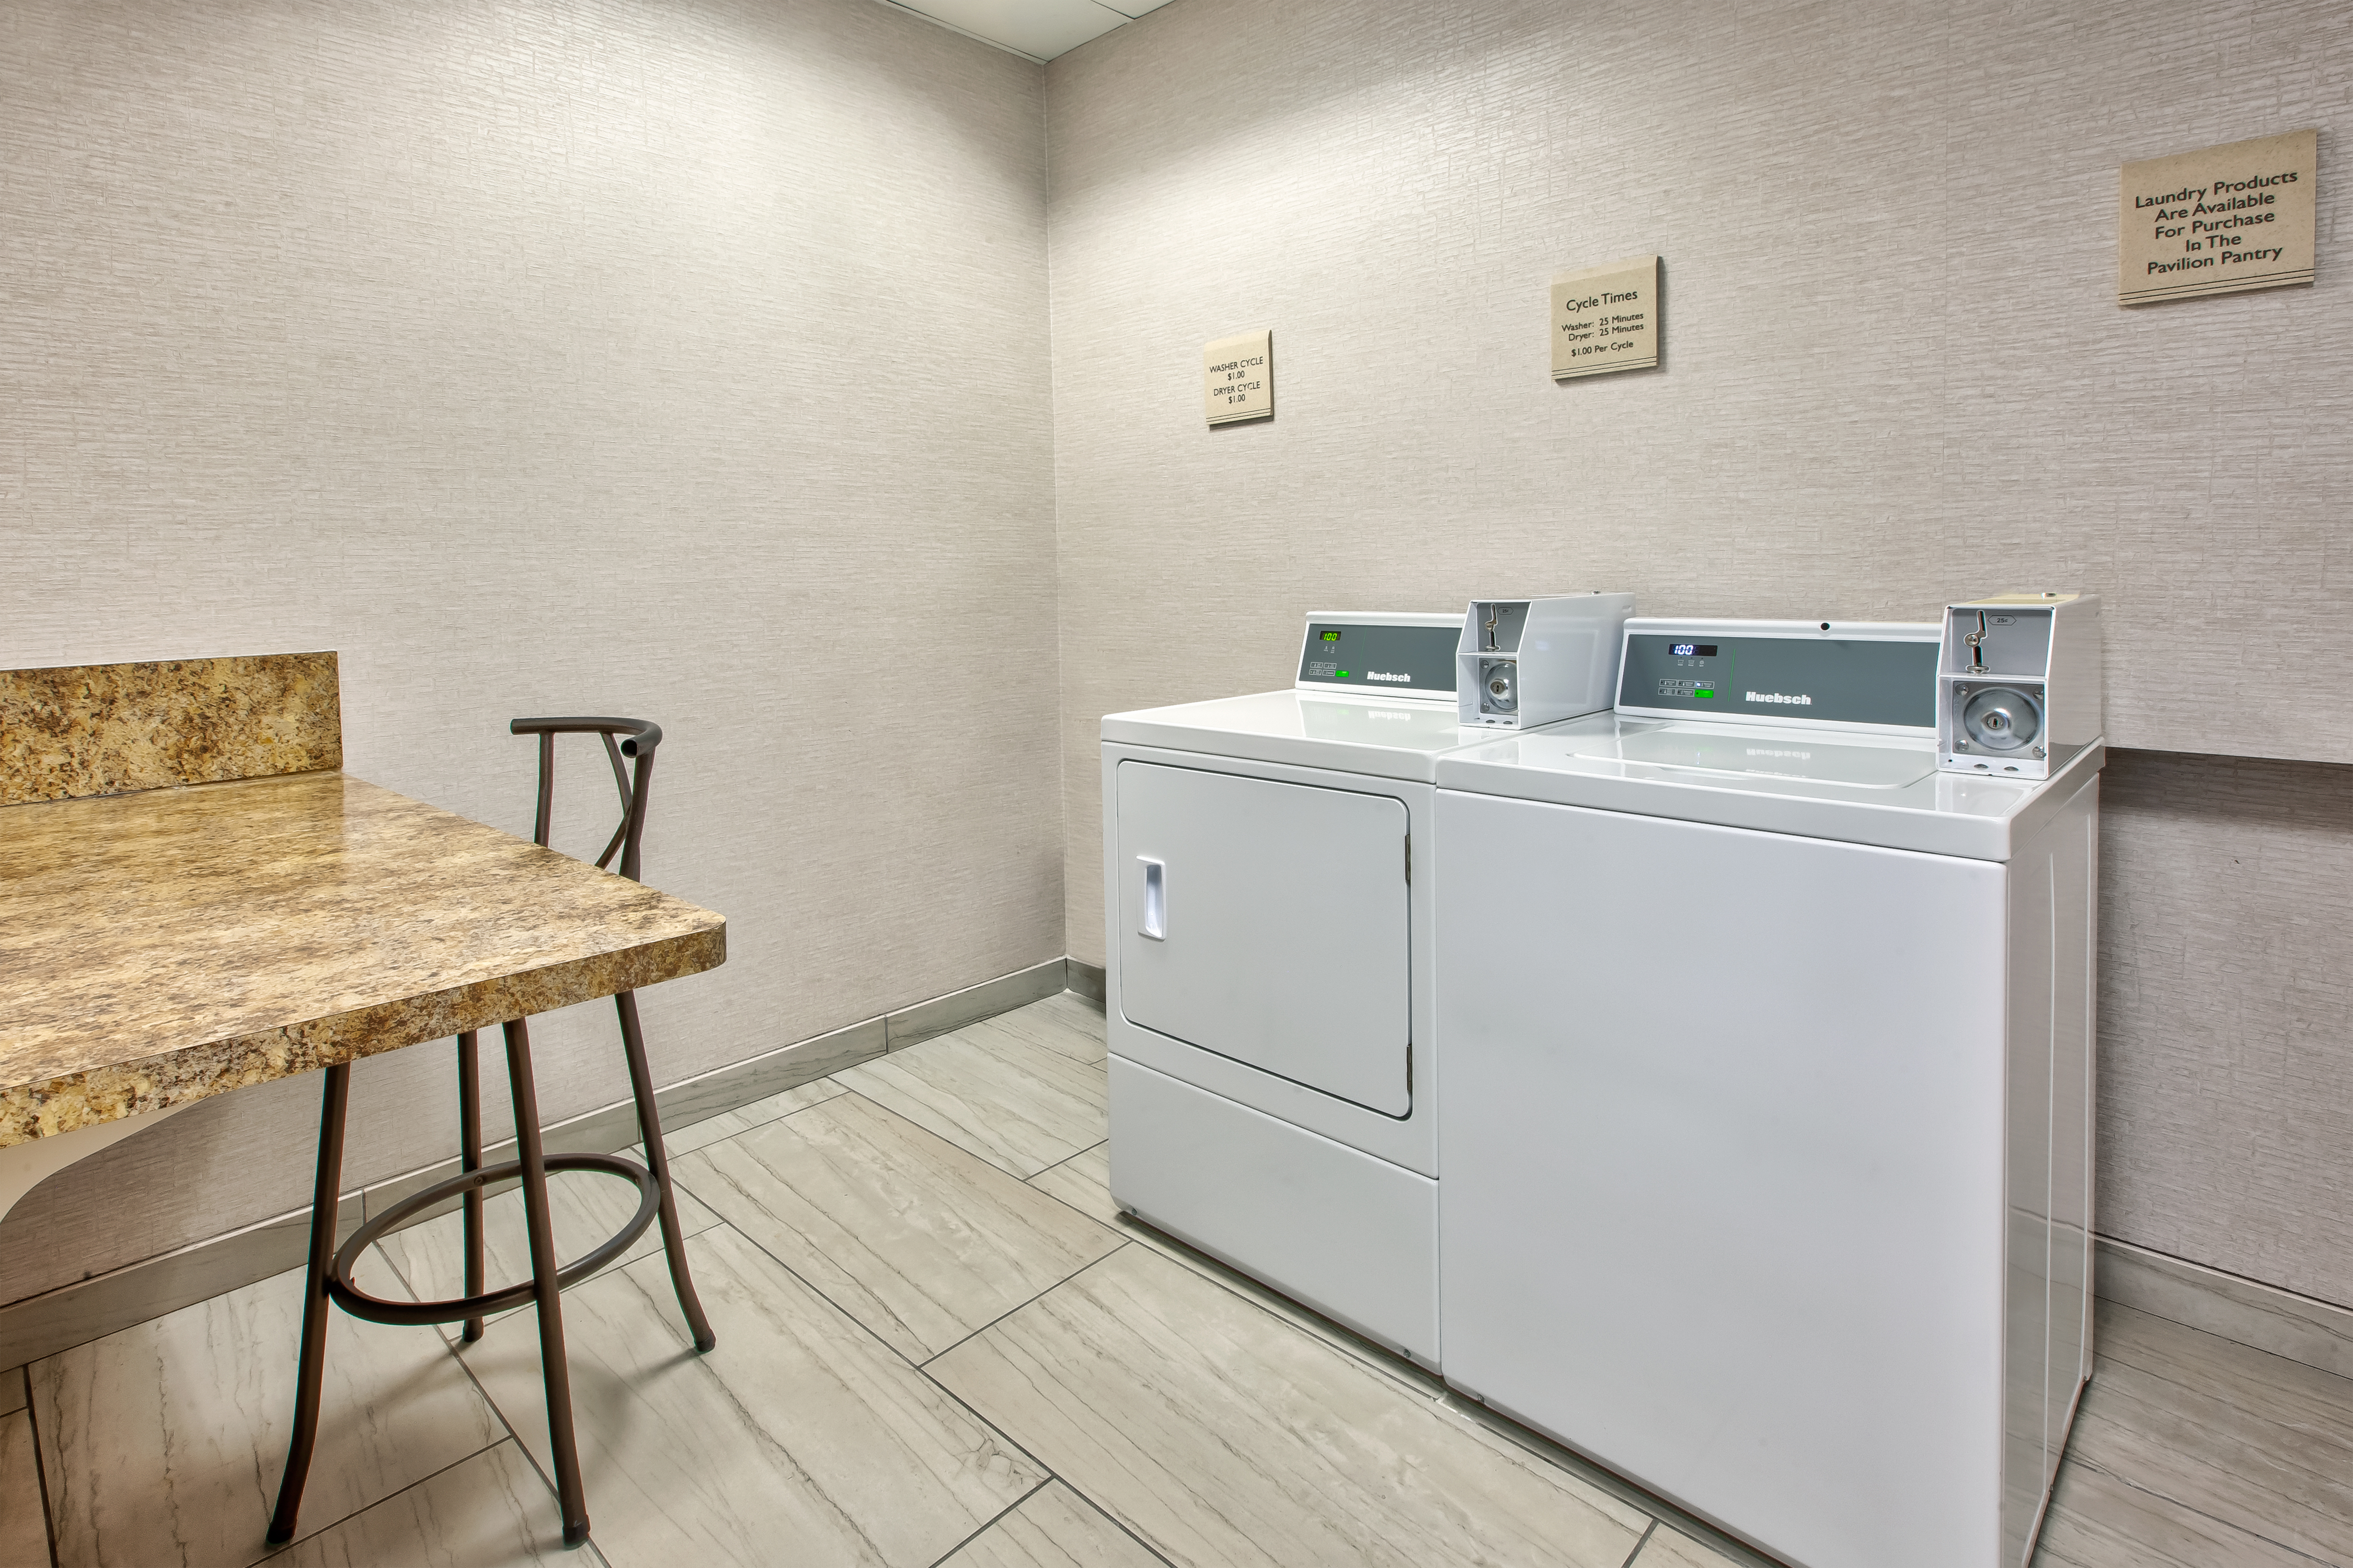 guest laundry room, washer and dryer